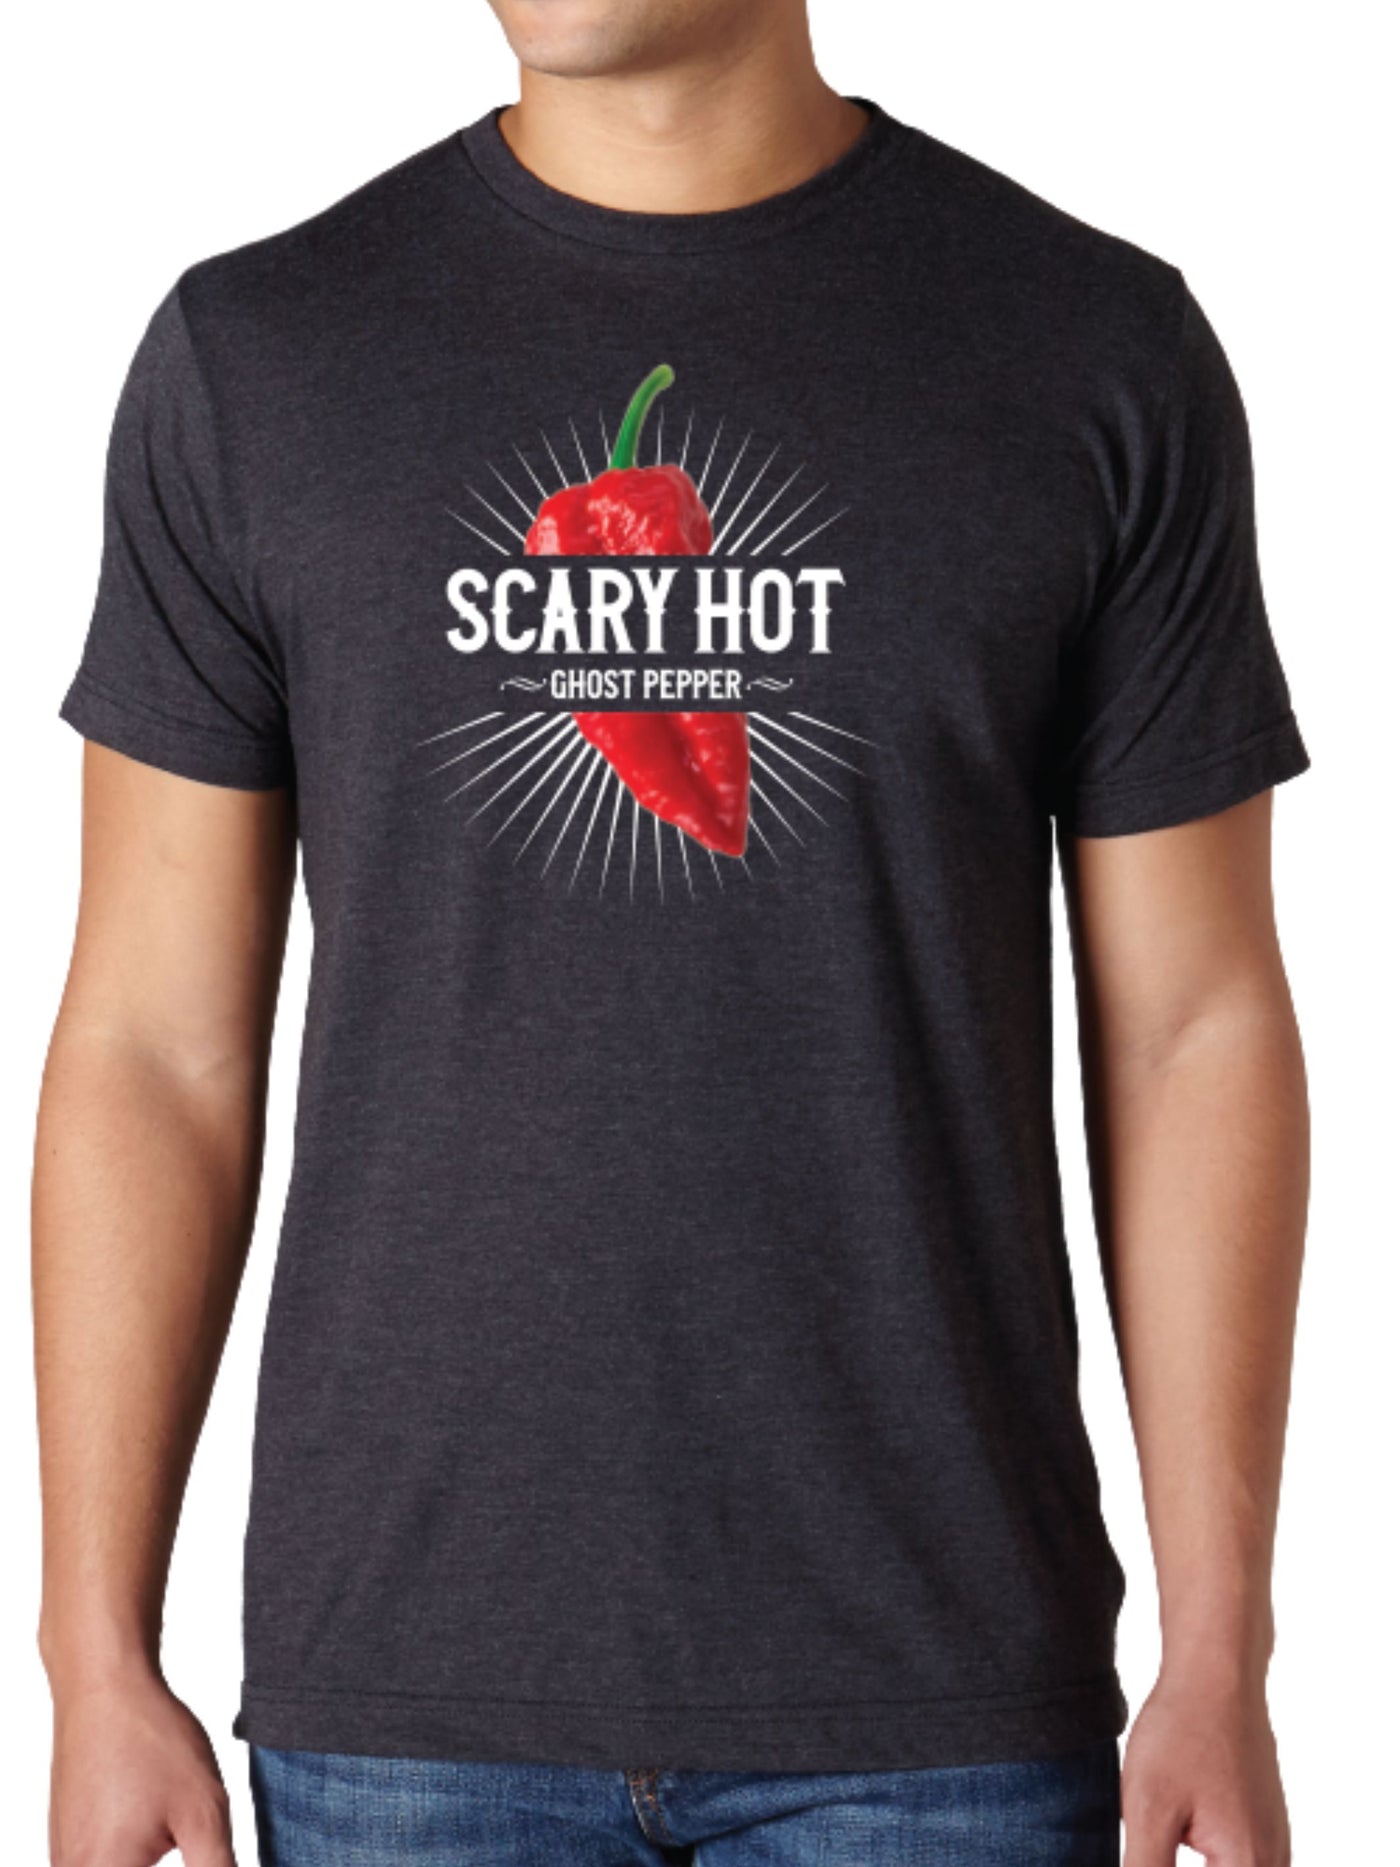 Scary Hot Ghost Pepper T-Shirt from Louisiana Pepper Exchange